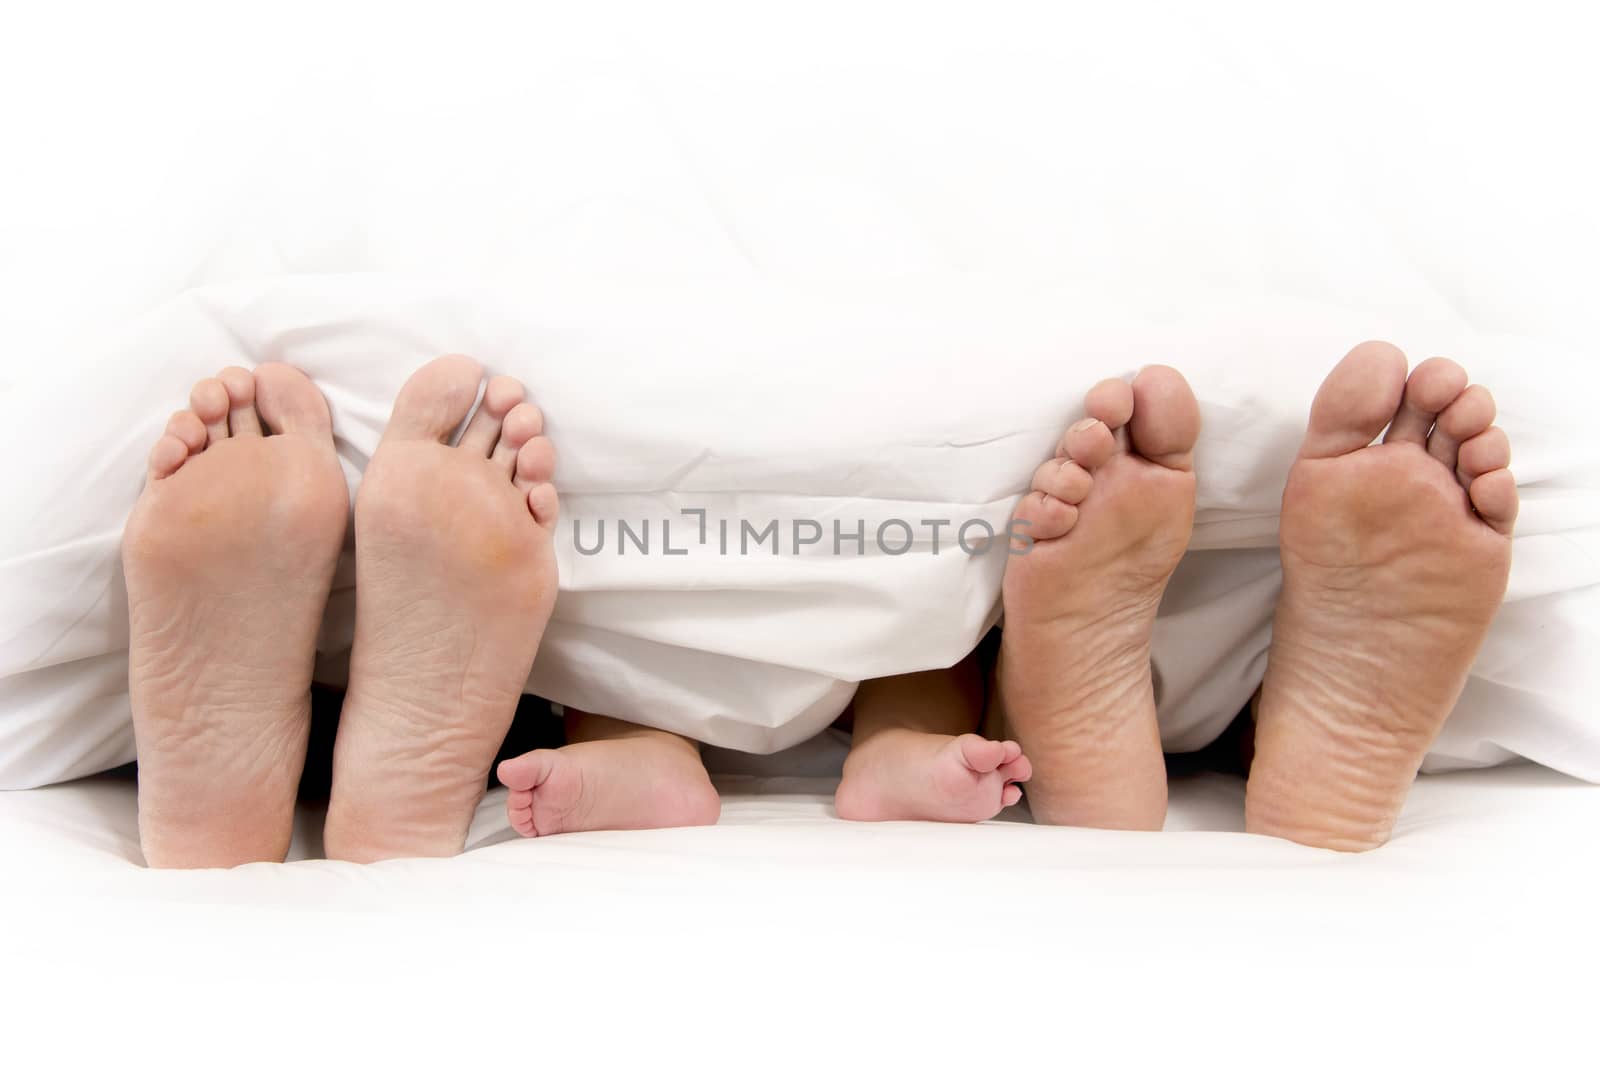 Mother Father and Baby Feet under Blanket isolated on white background